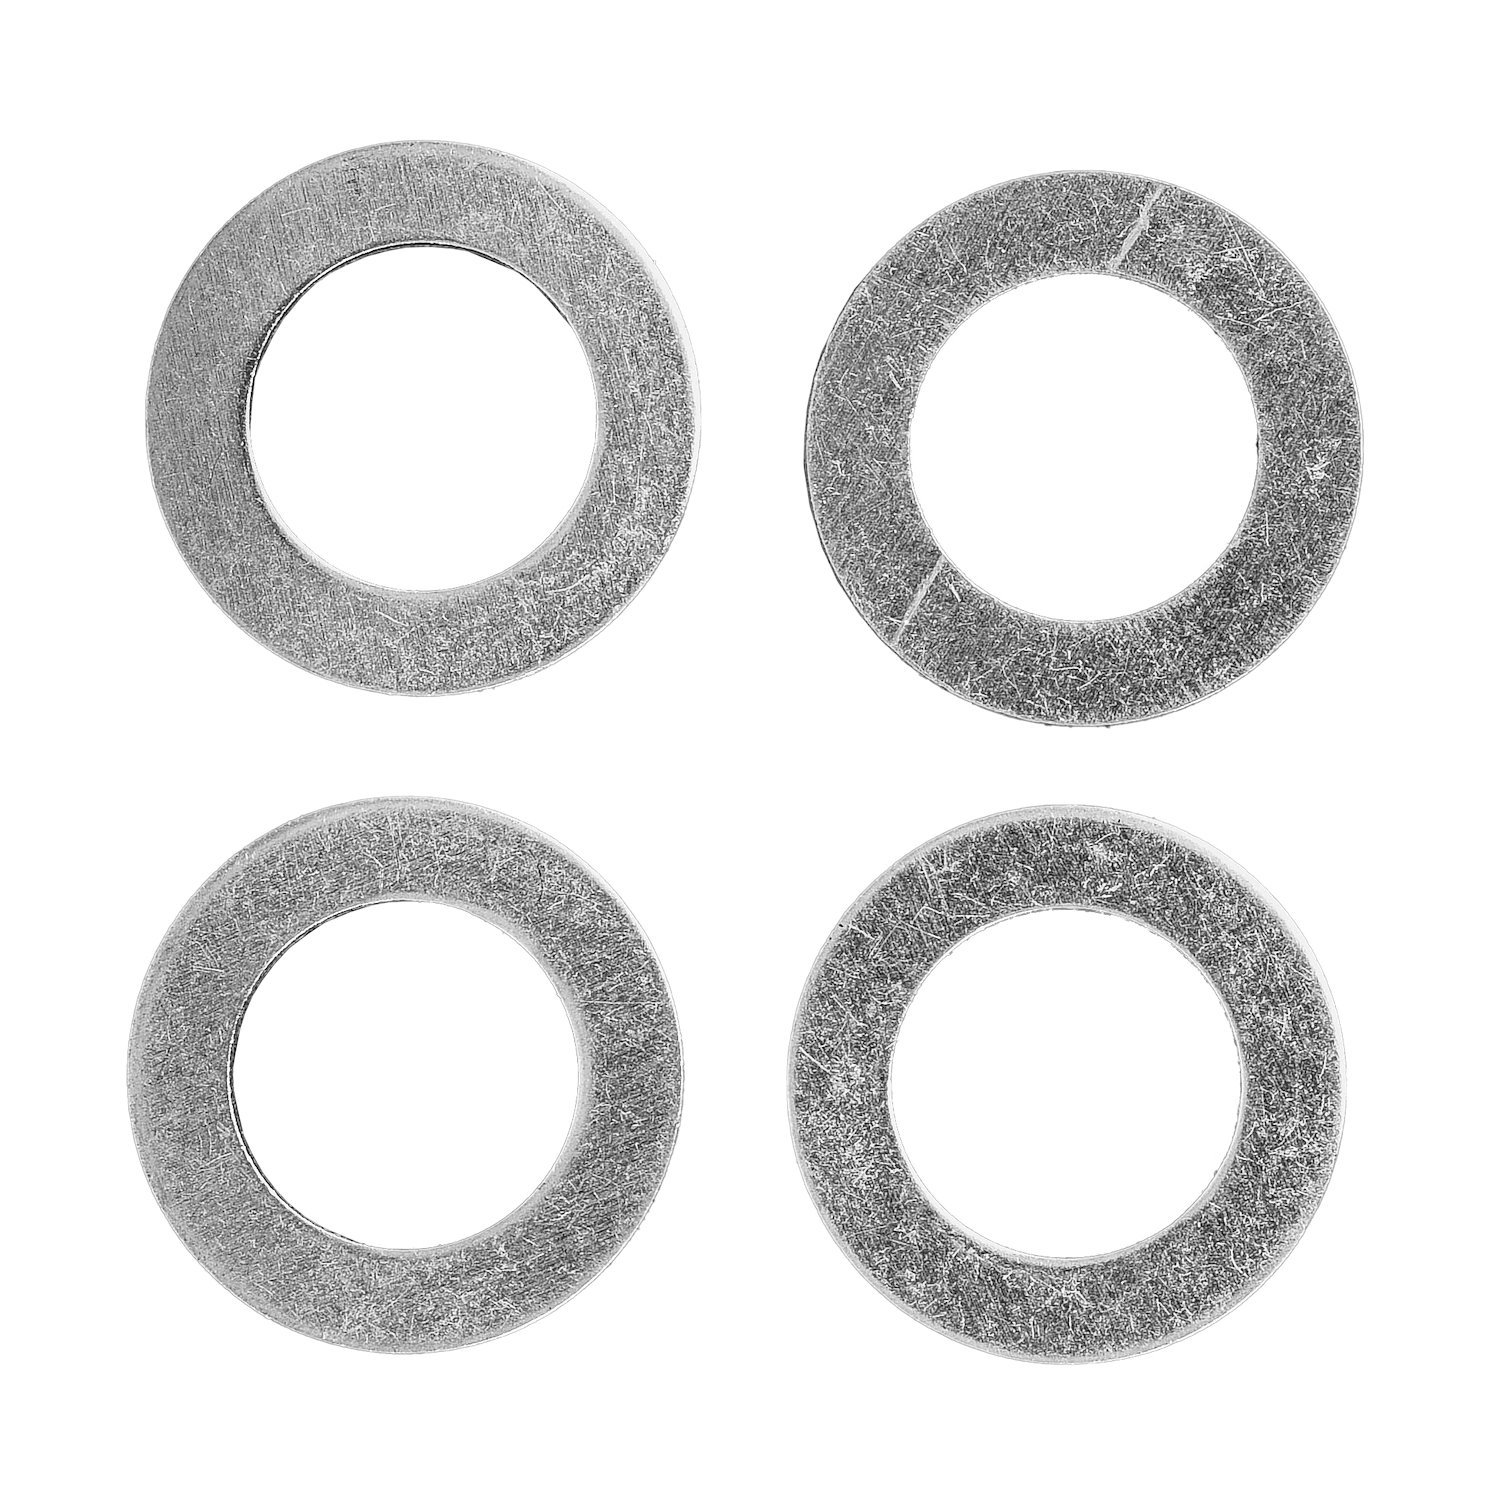 Banjo Bolt Crush Washers [7/16 in. or 11 mm]